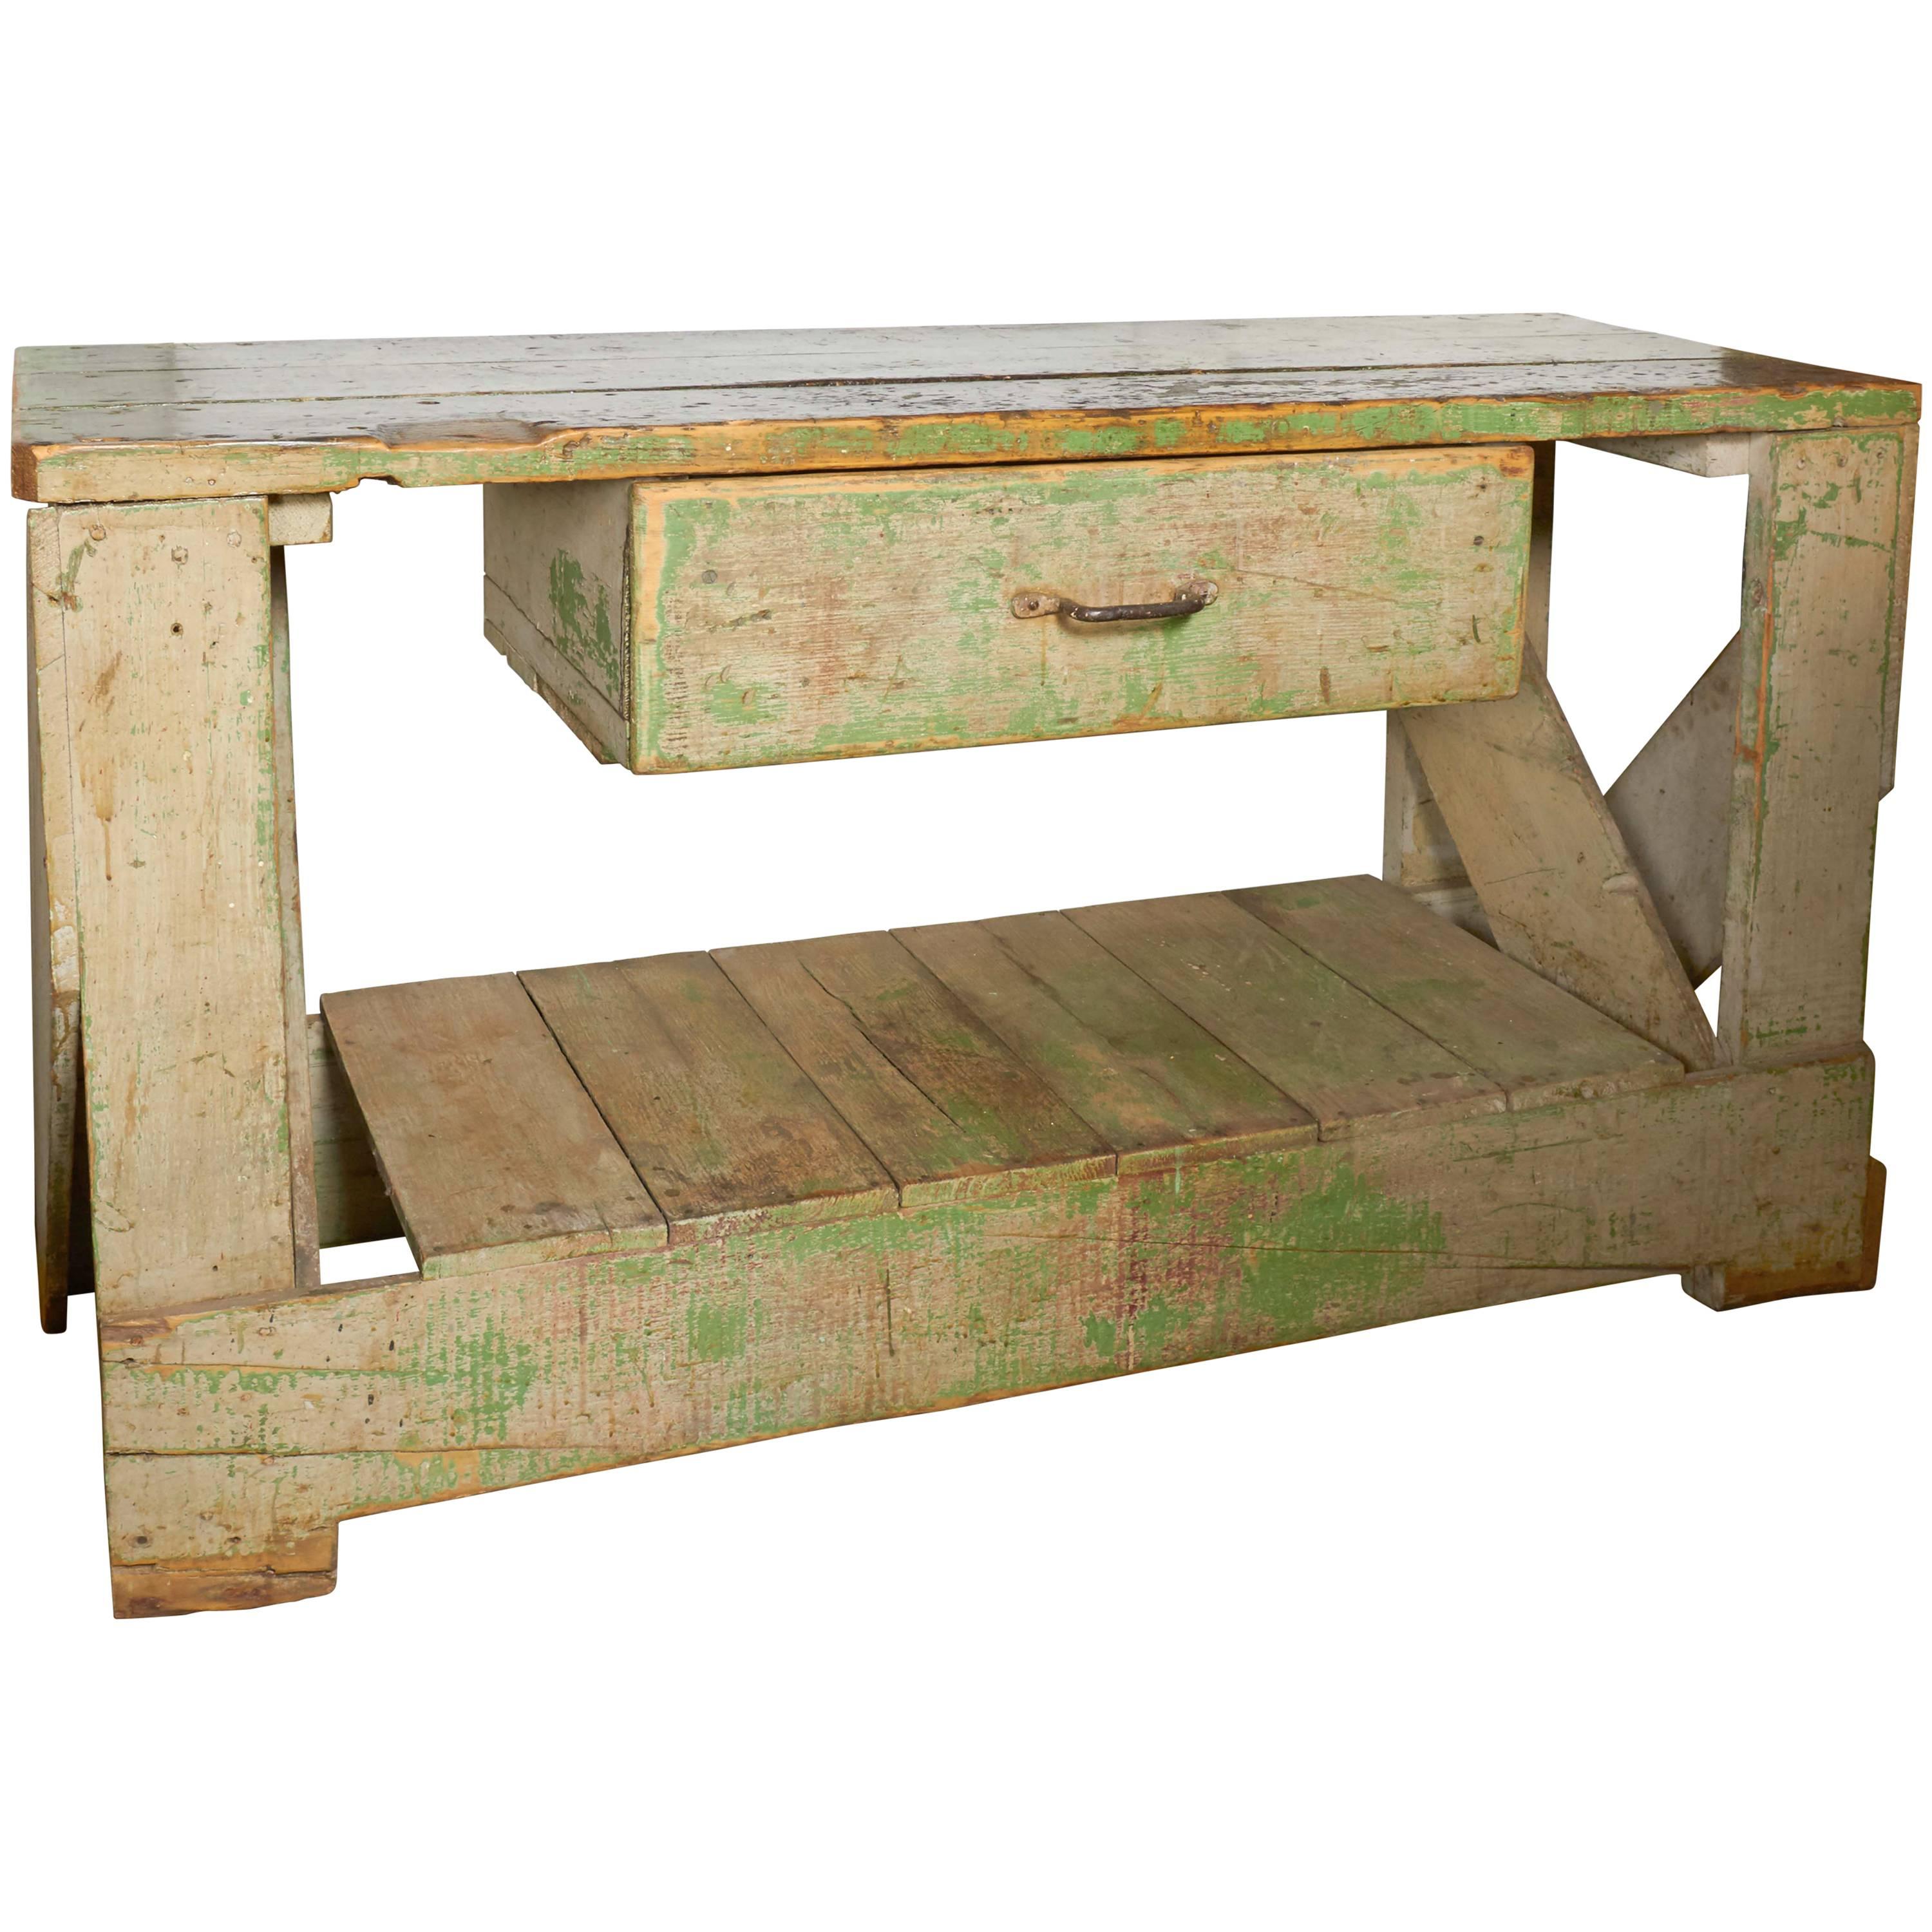 Green Work Bench For Sale